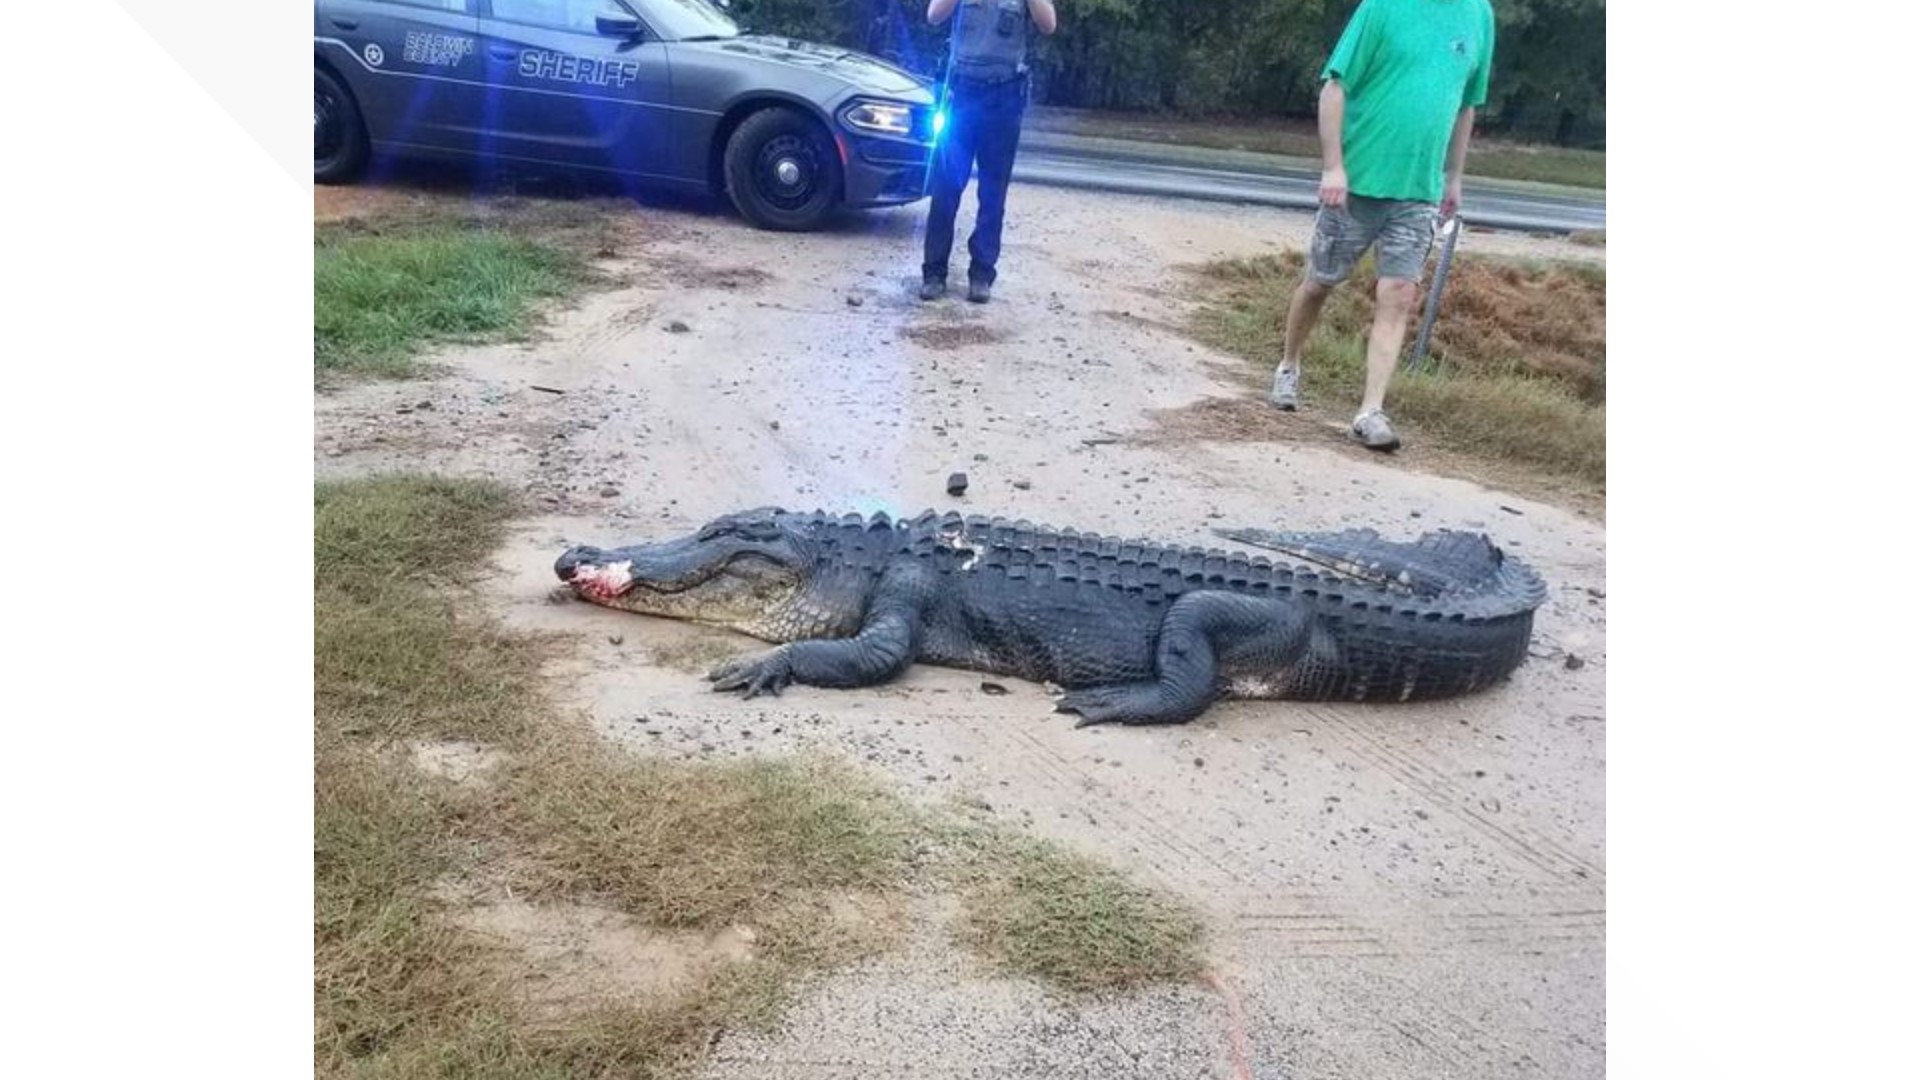 Deputy Brandon Towe says a passerby measured the gator, it was 10'6" long.